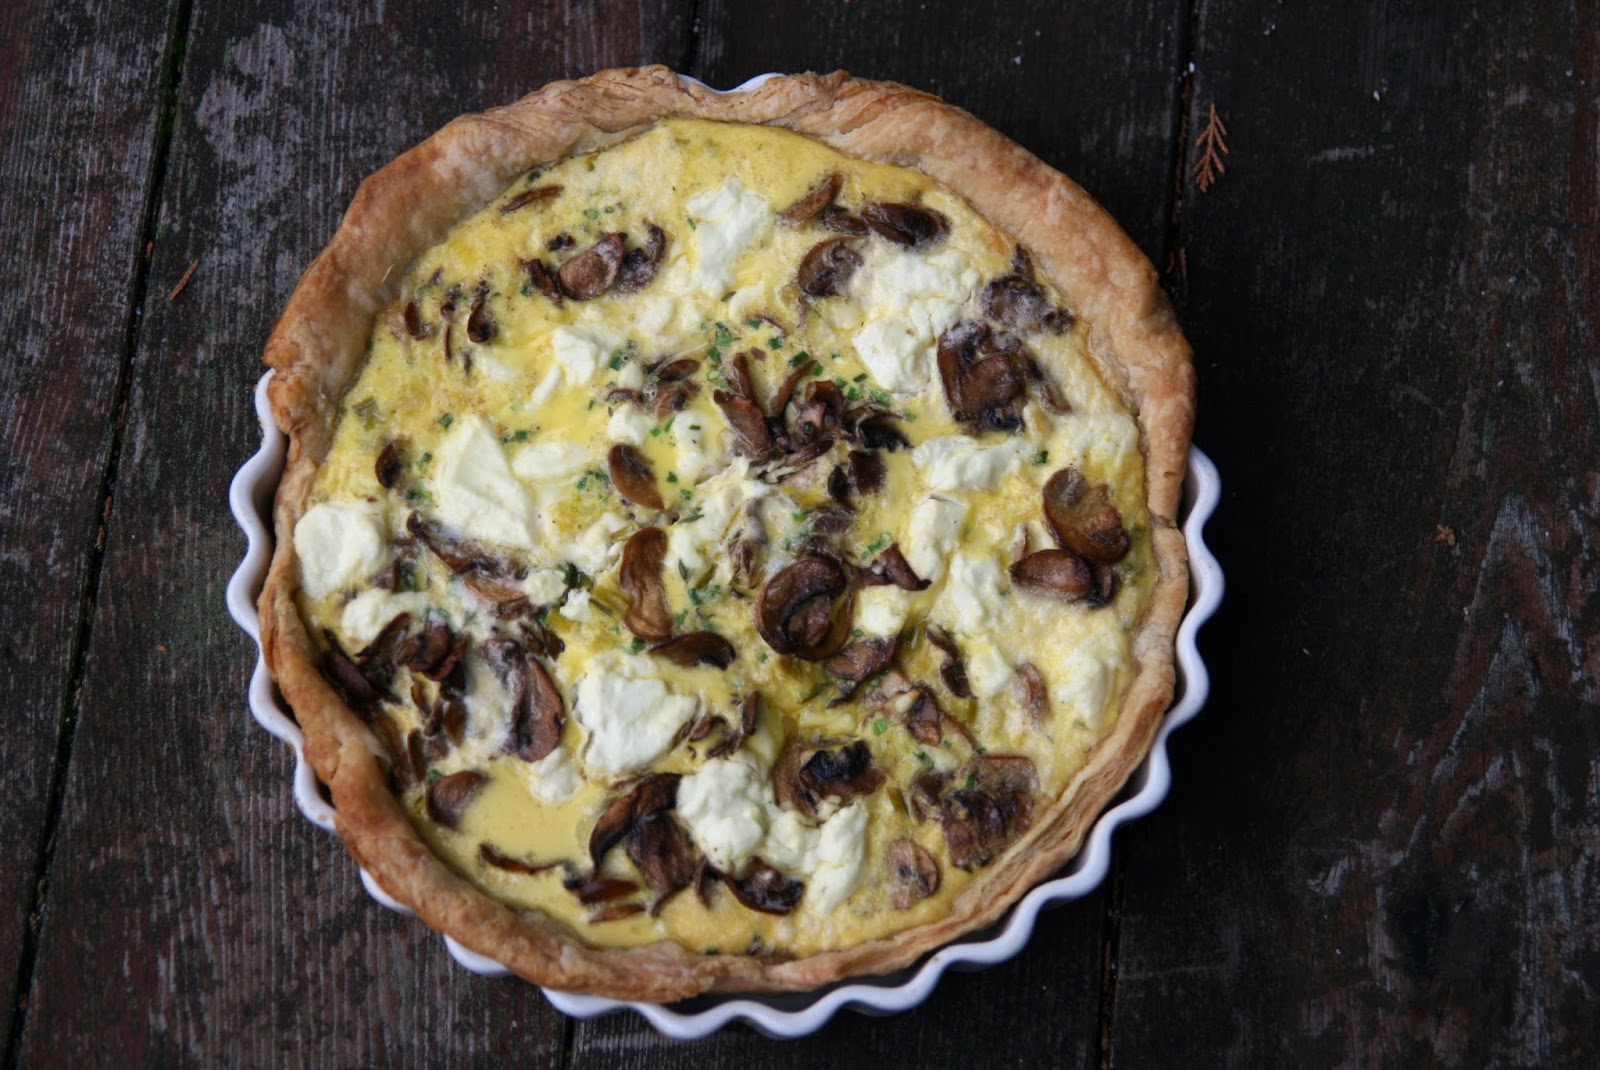 Mushroom Leek Quiche with Goat Cheese Recipe | mostly foodstuffs